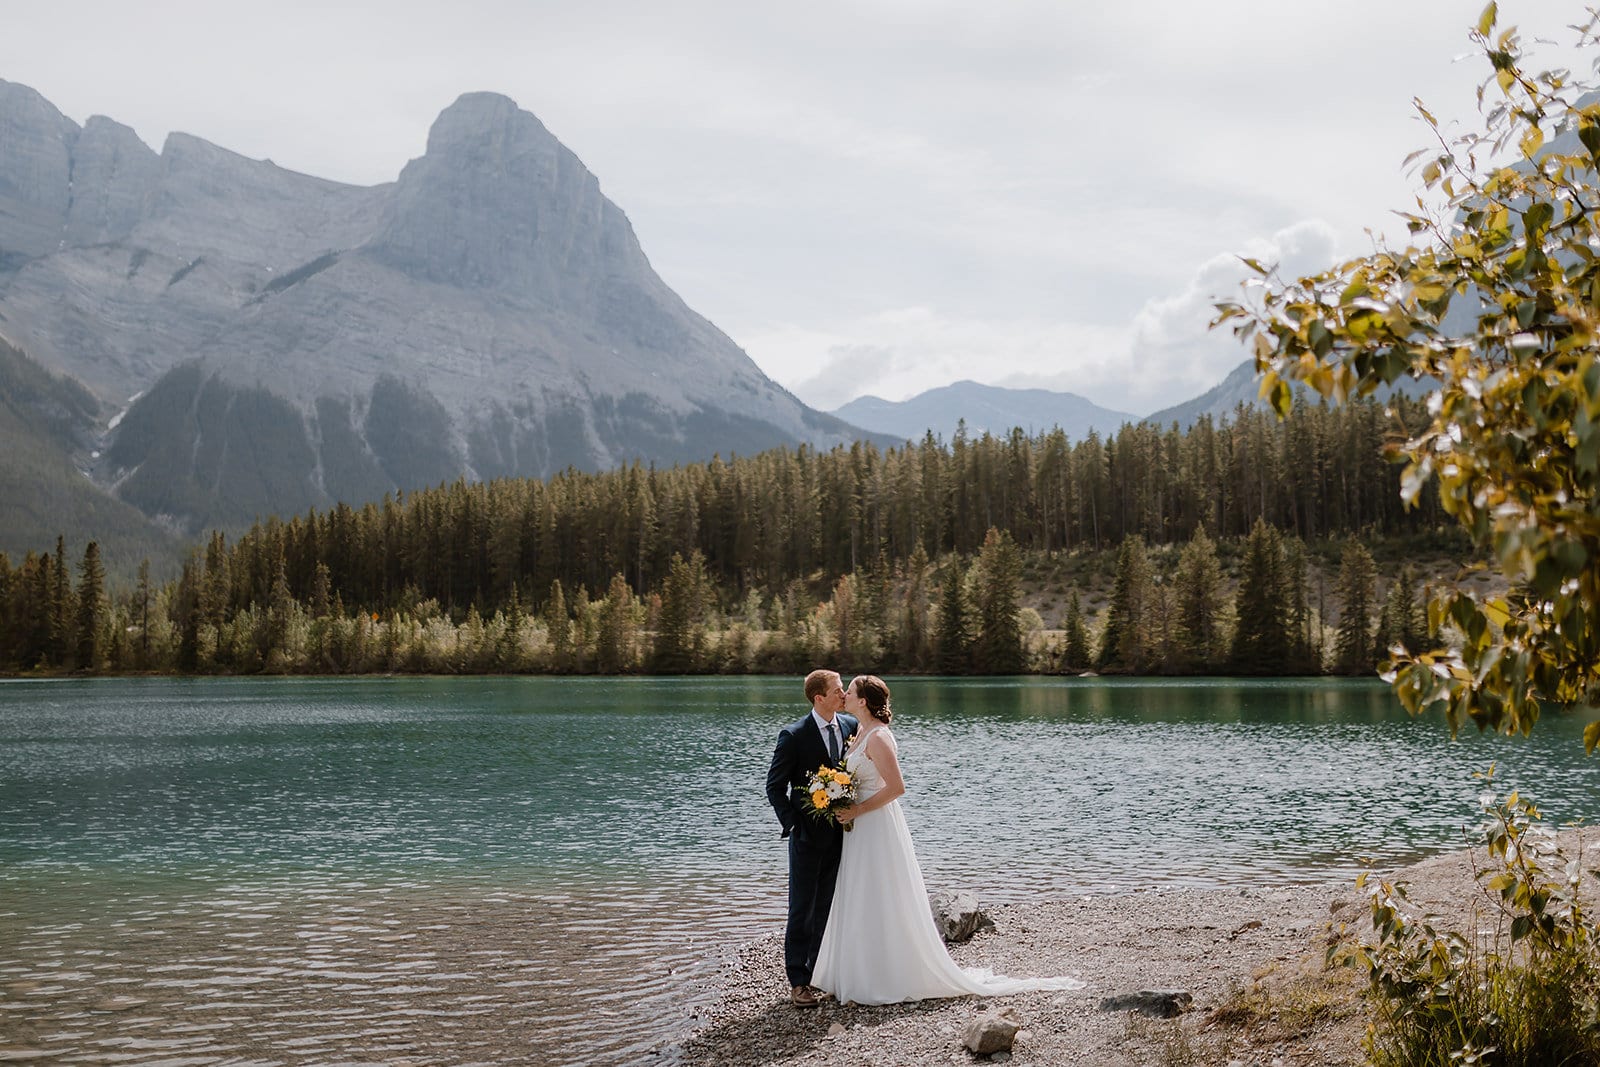 WEDDING AT QUARRY LAKE IN CANMORE, AB